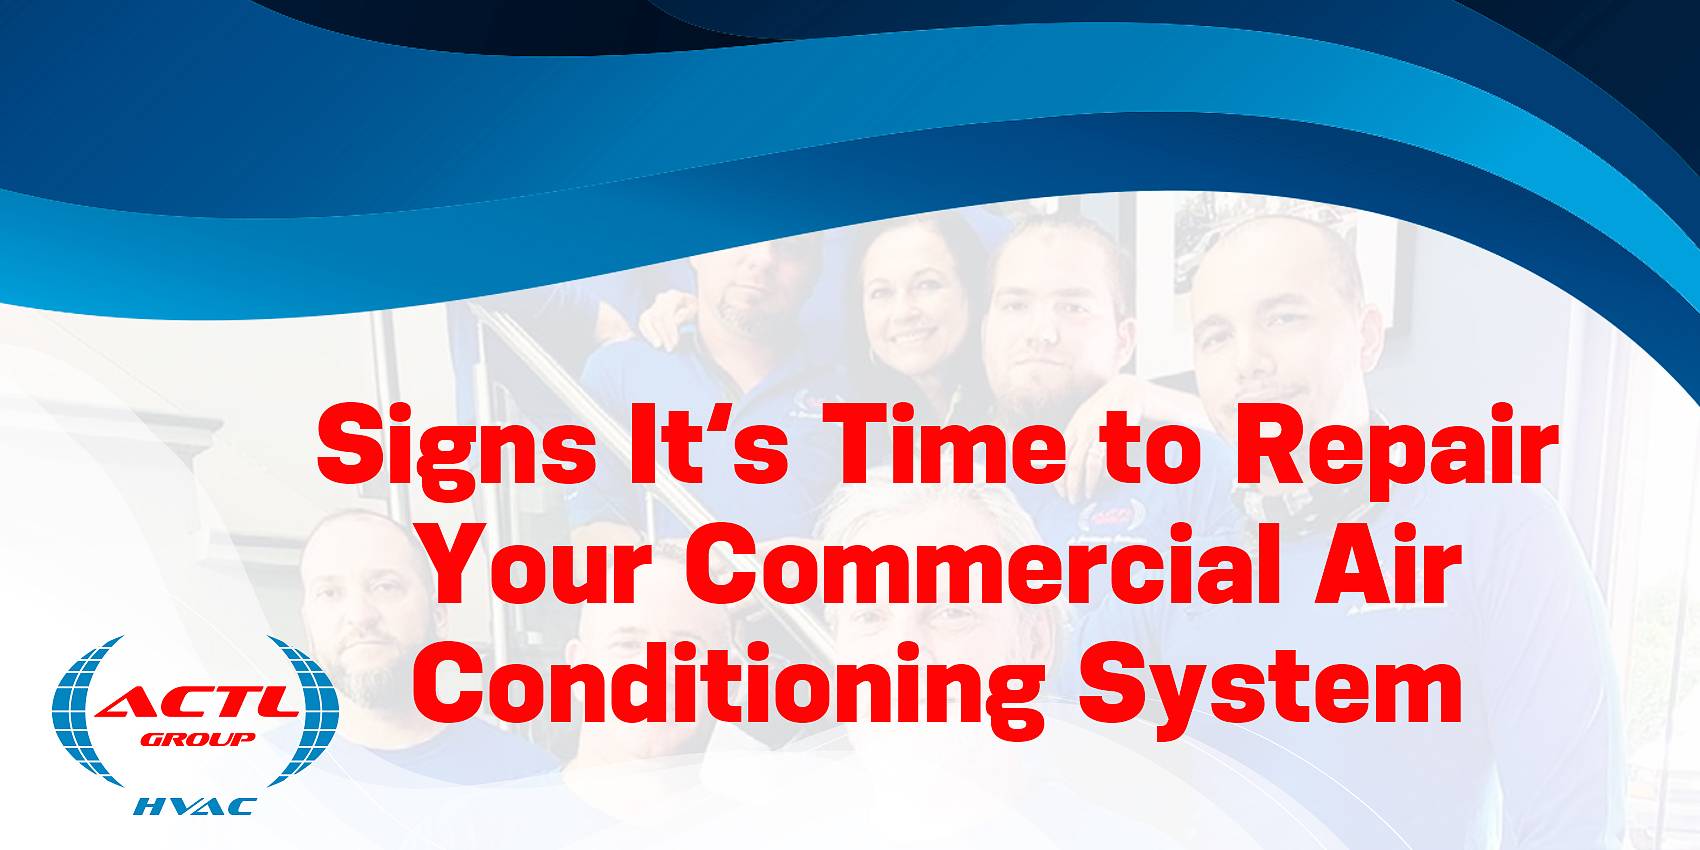 actl group Signs It’s Time to Repair Your Commercial Air Conditioning System